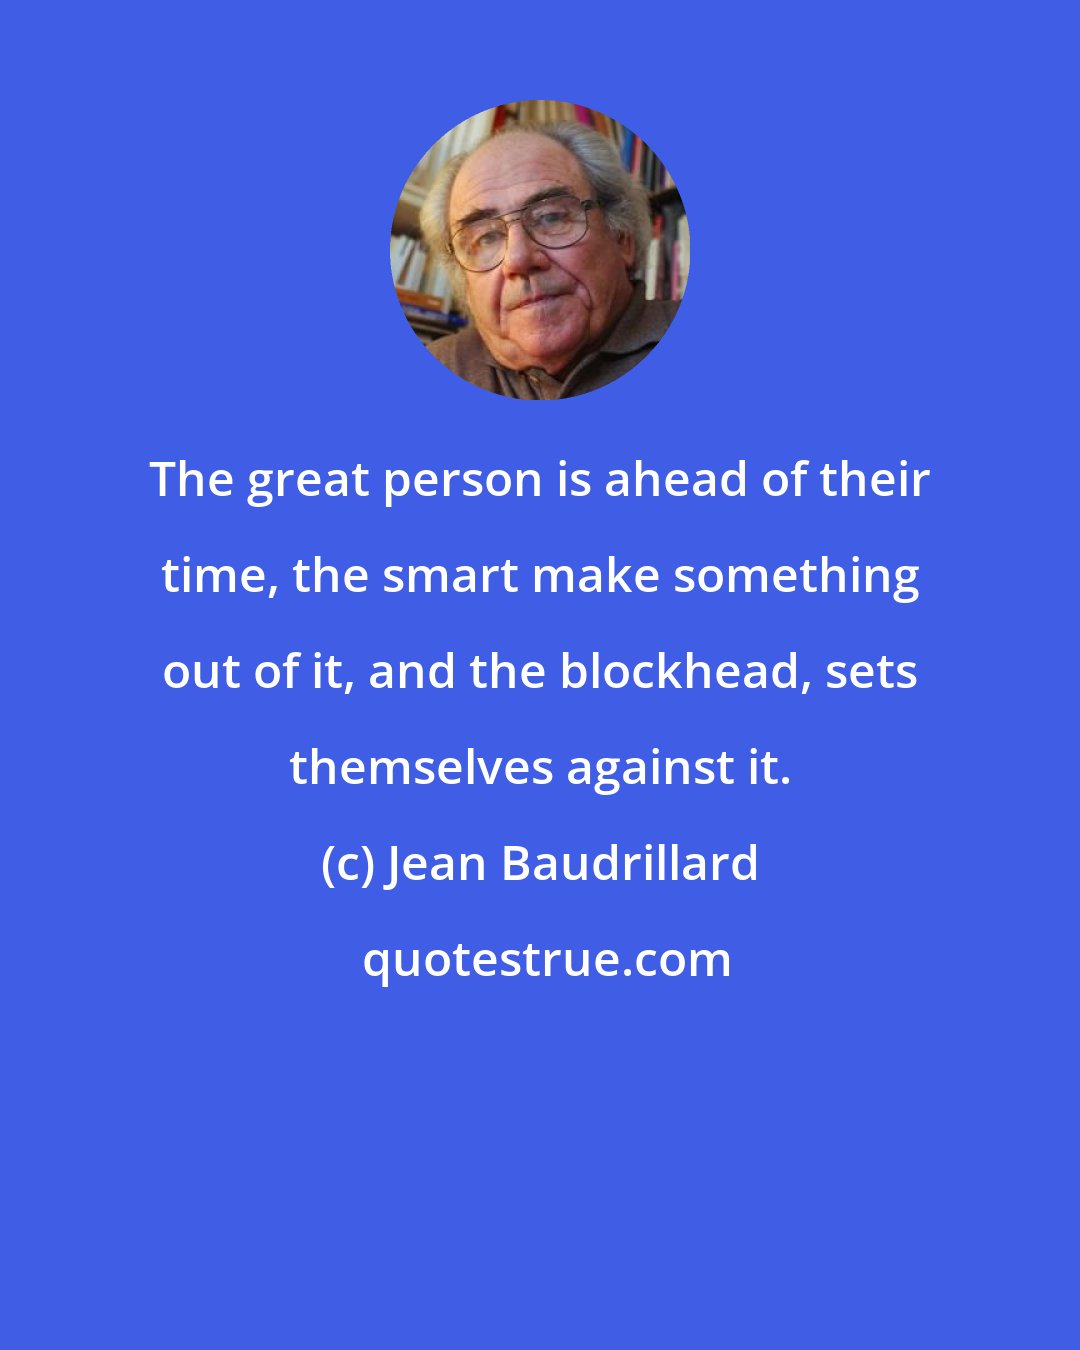 Jean Baudrillard: The great person is ahead of their time, the smart make something out of it, and the blockhead, sets themselves against it.